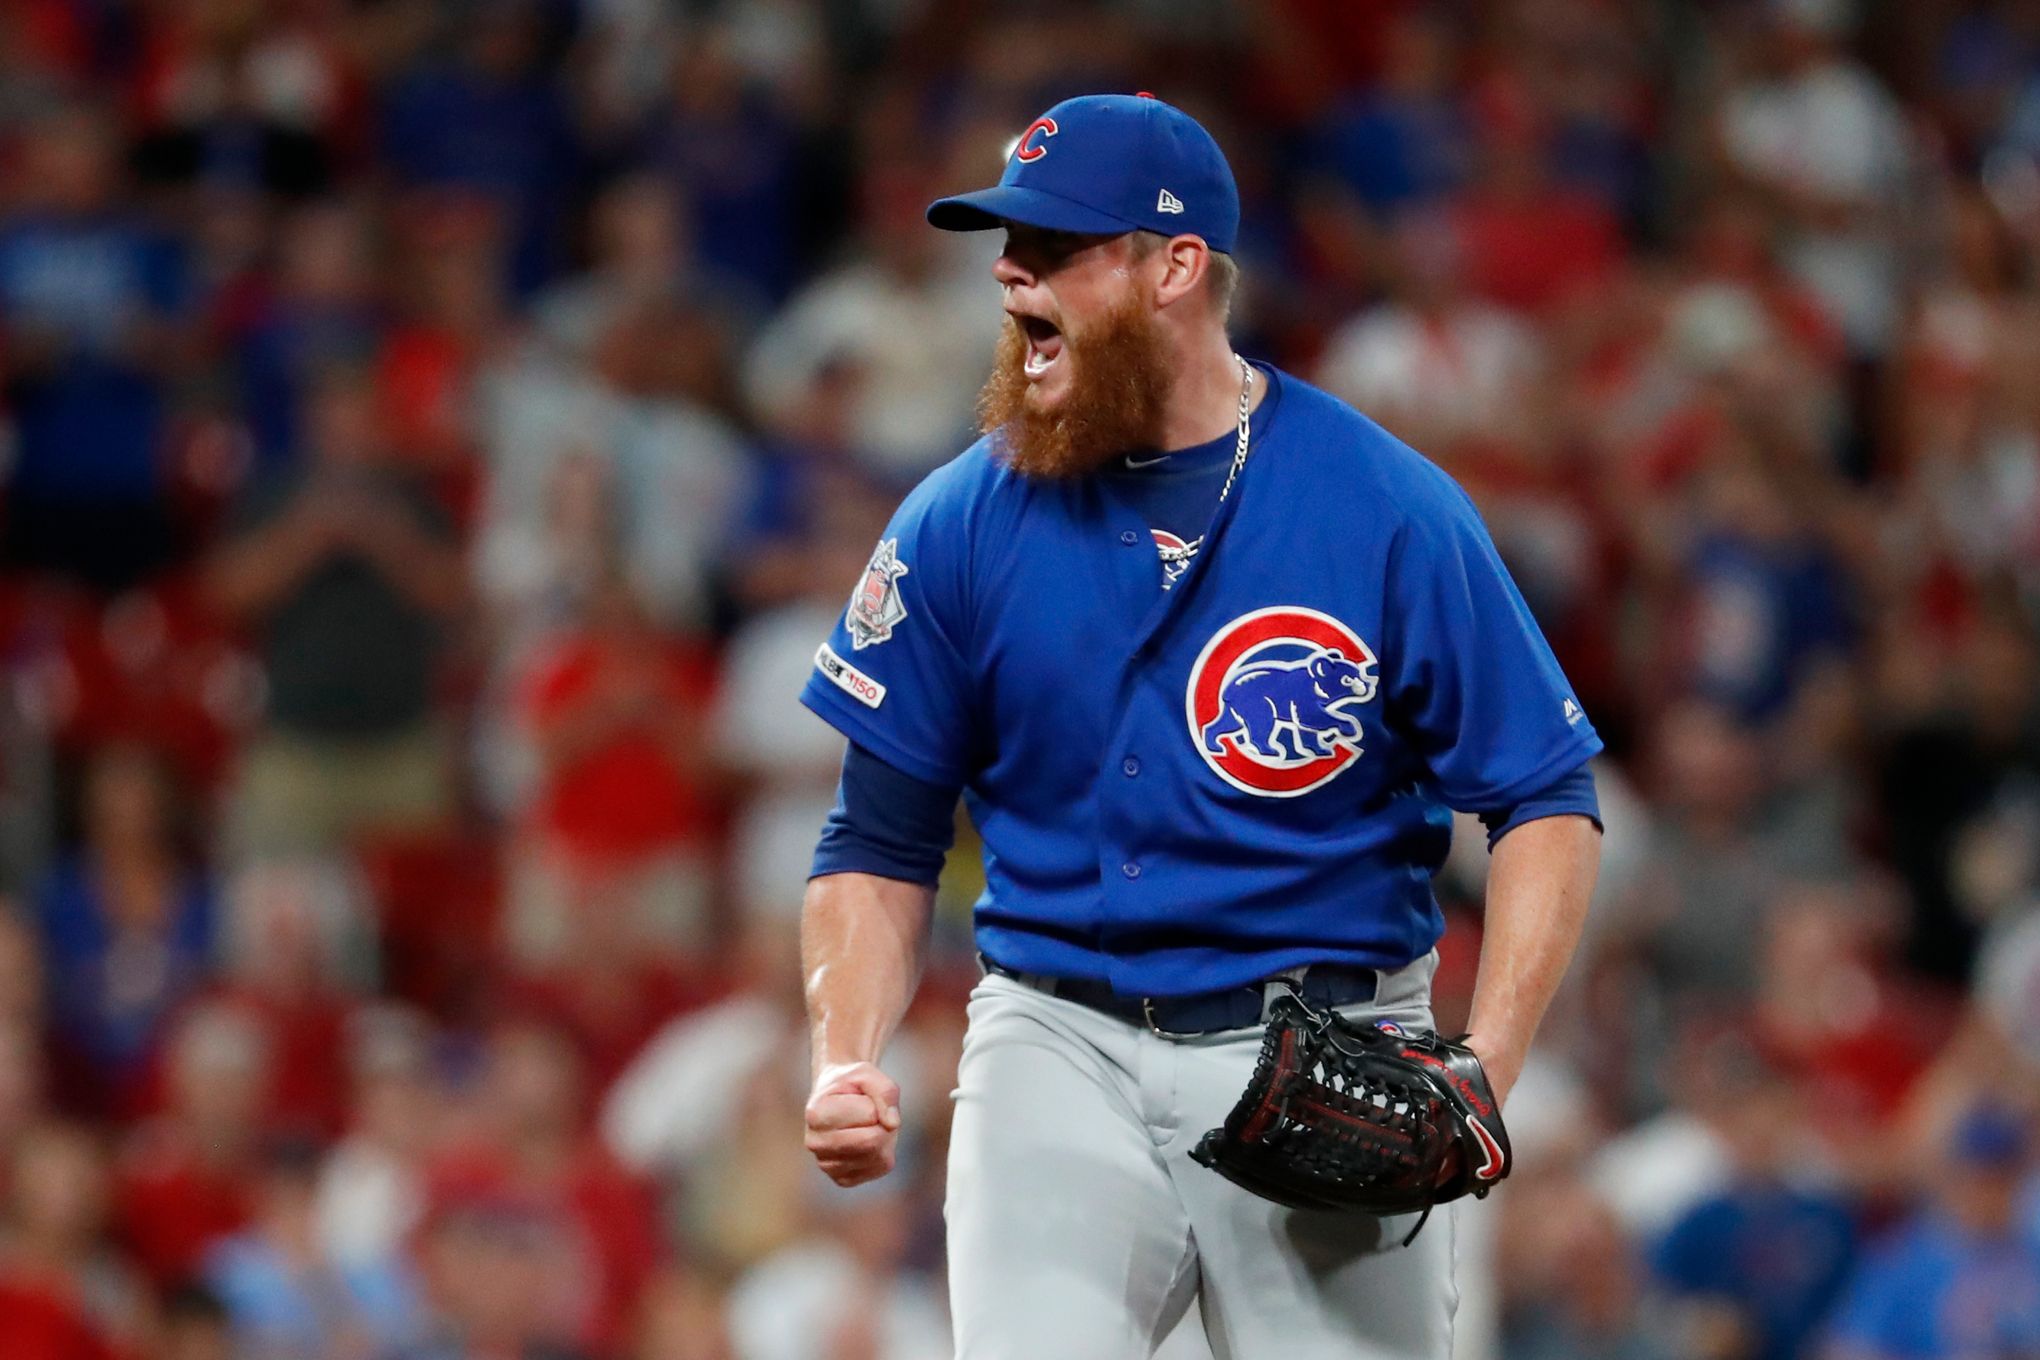 Cubs' Kimbrel believes he has last year's problems figured out